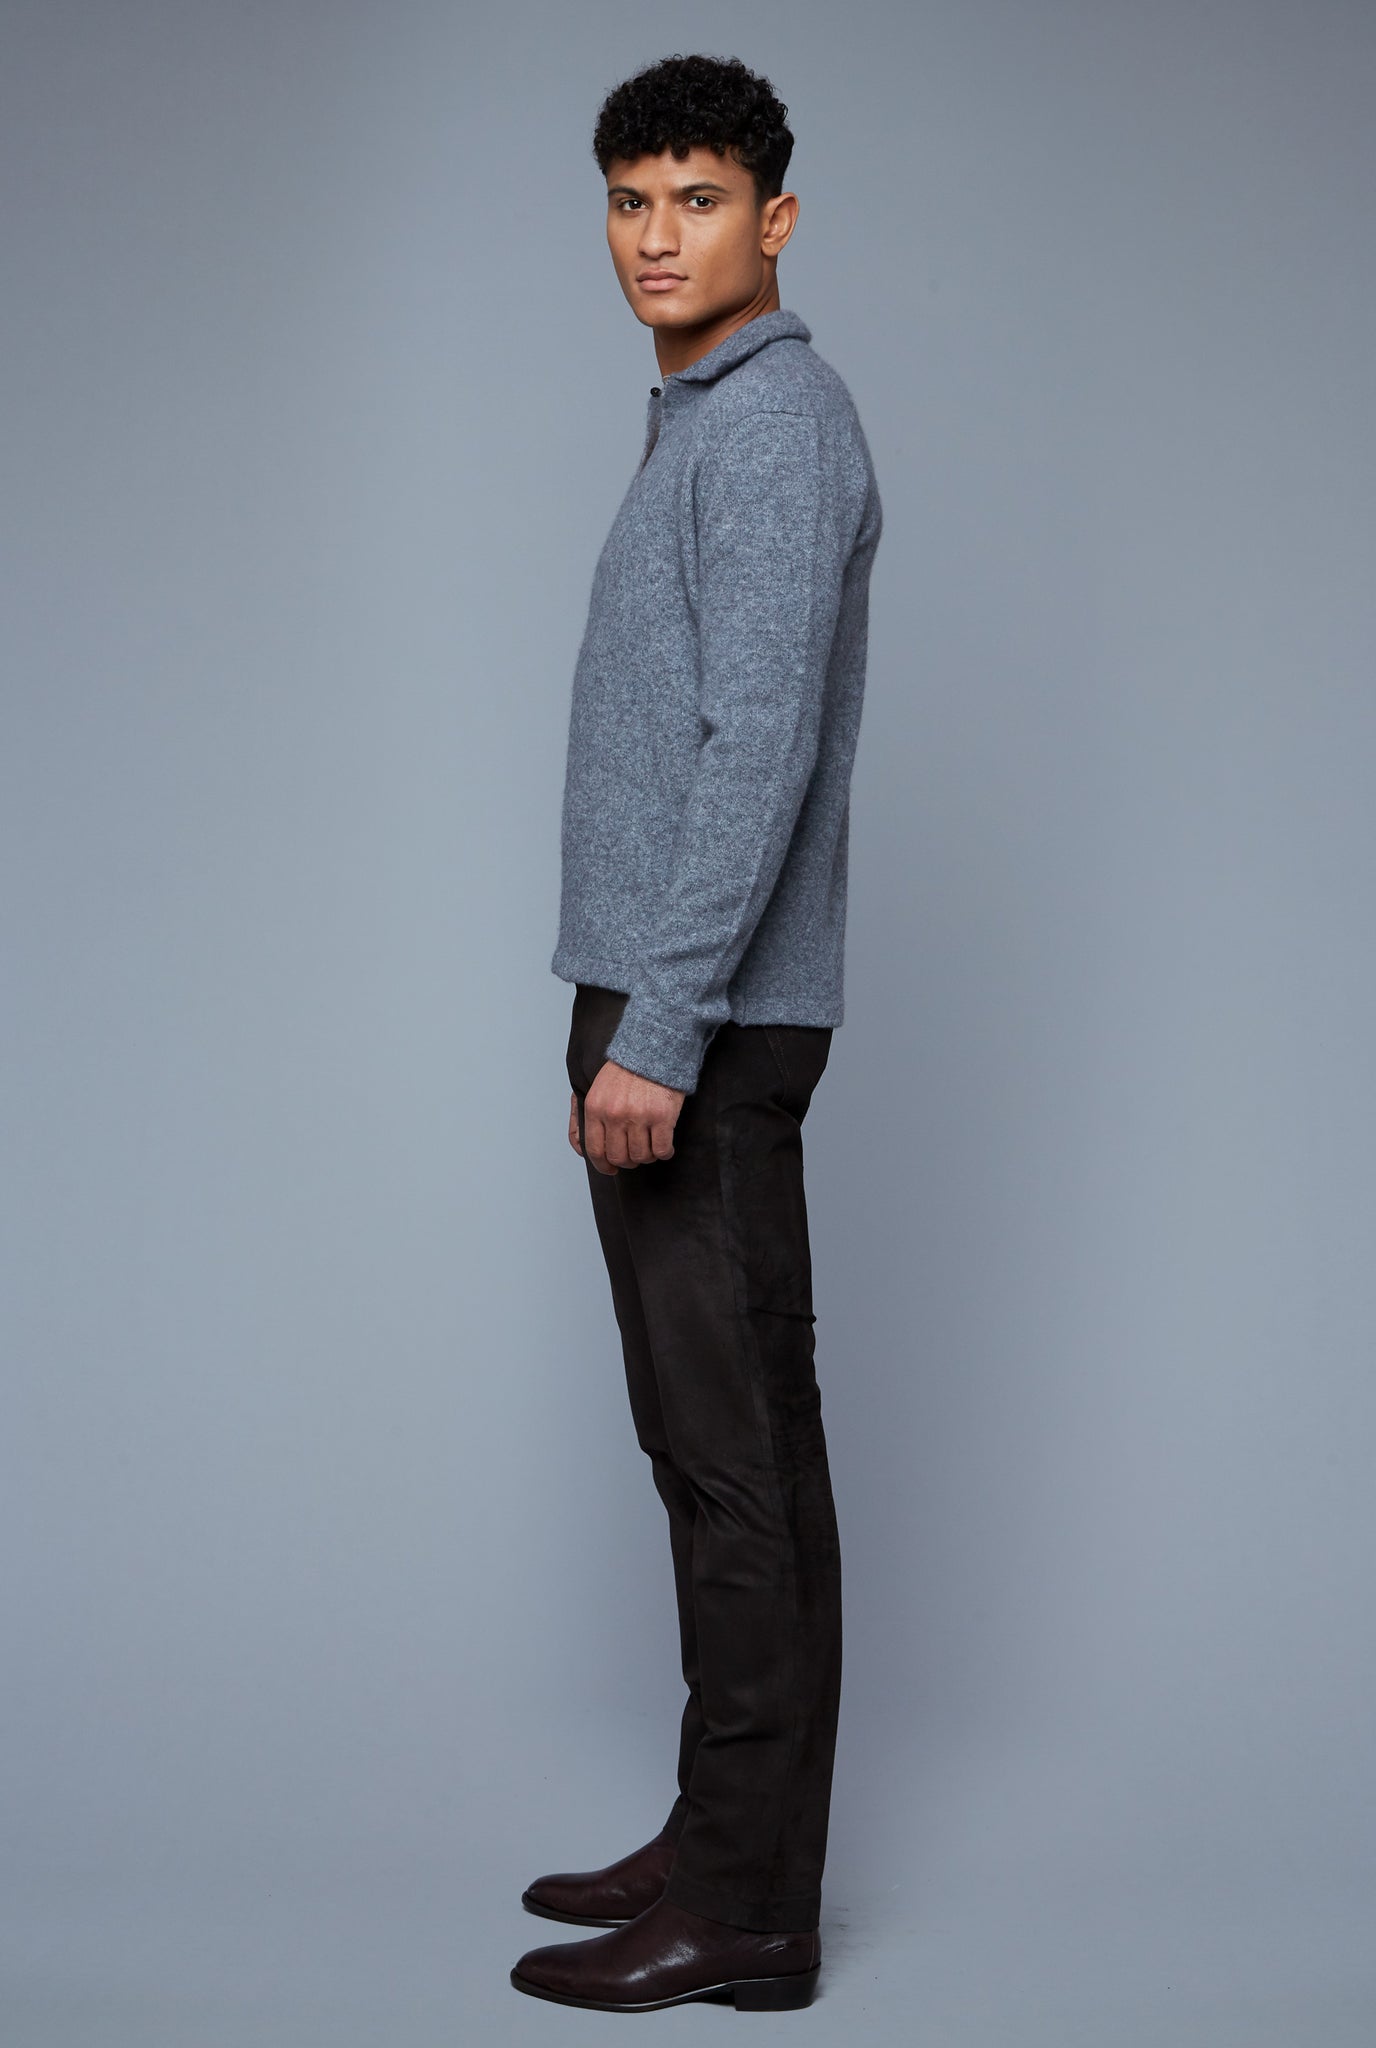 Side View: Model Tre Boutilier wearing Cashmere Boucle Sweater